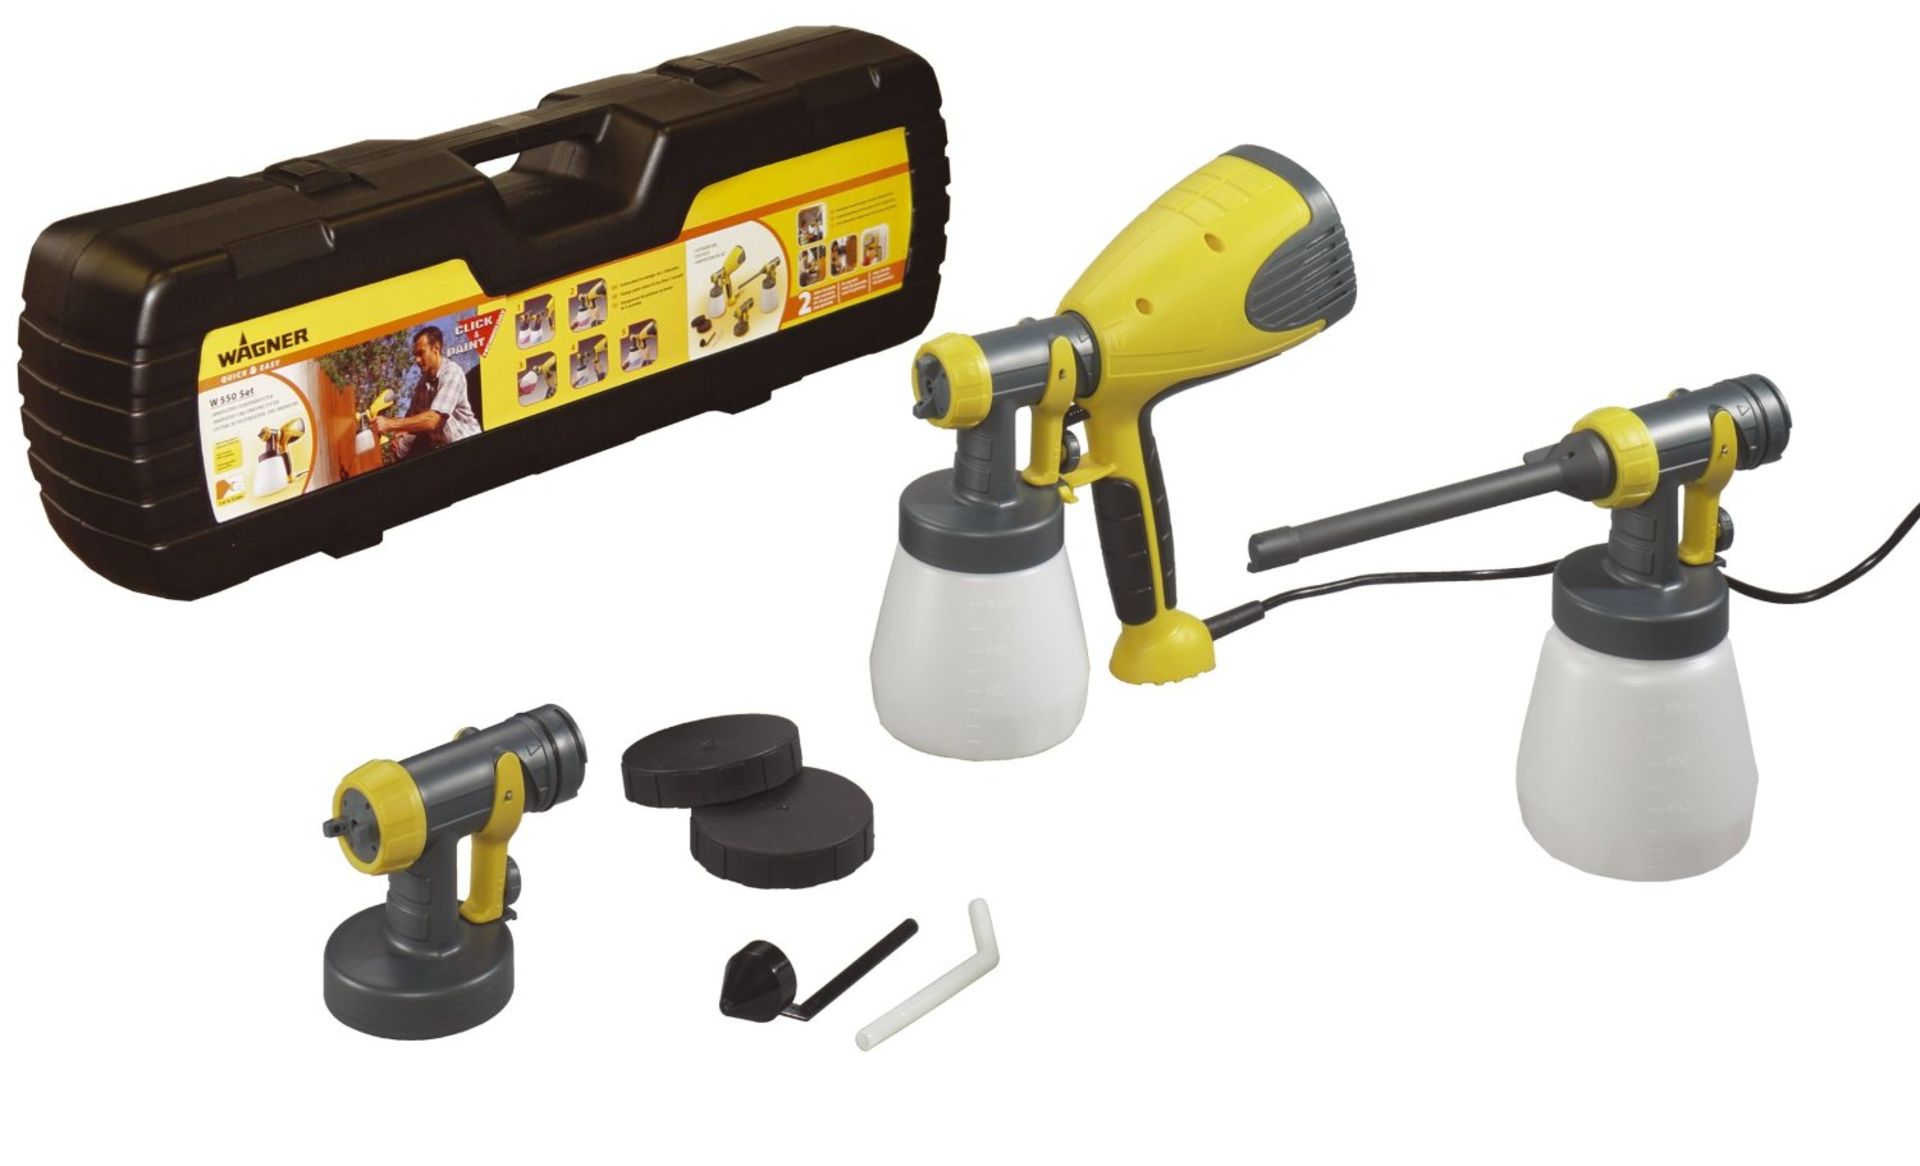 Wagner GB W-550 HVLP Fine Paint Spray System with Radiator Nozzle and Carry Case 3-way adjustable